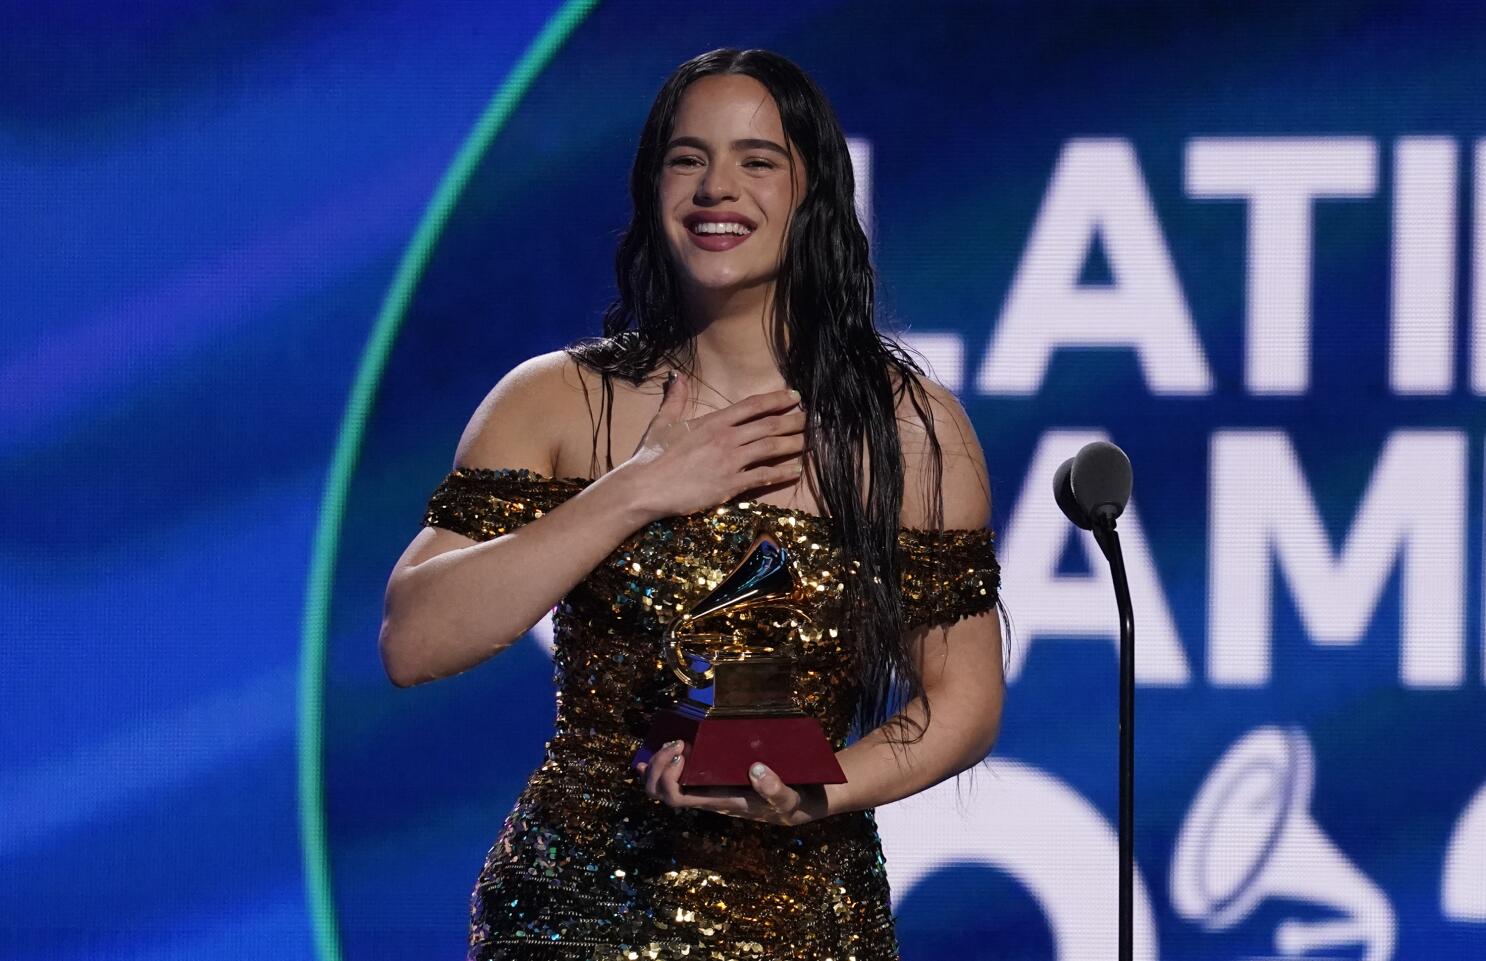 2023 Latin Grammys: List of Performers, How to Watch Live Online Free